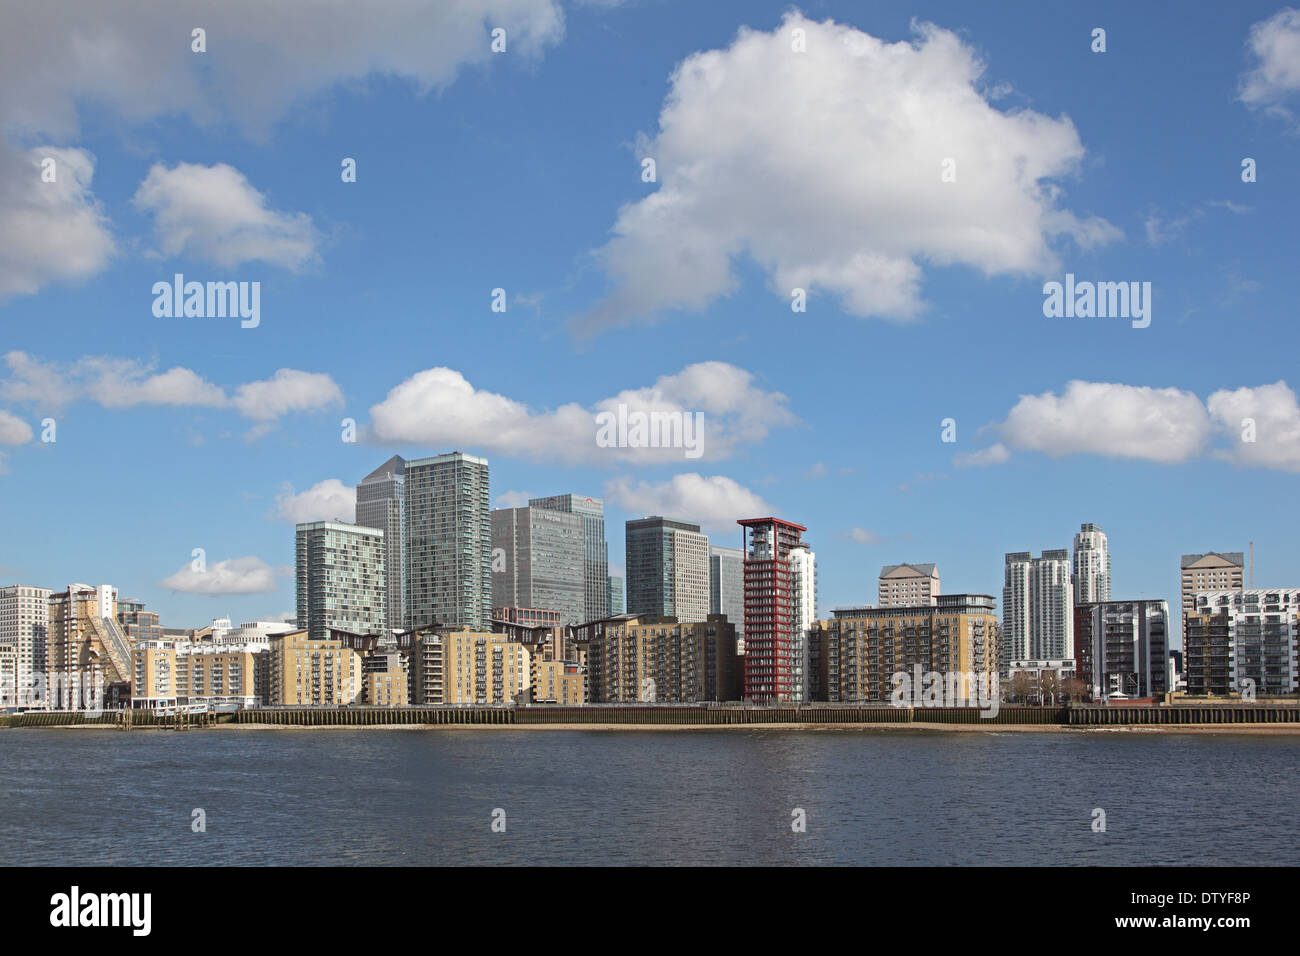 London's Canary Wharf development viewed from the South side of the River Thames in Rotherhithe Stock Photo